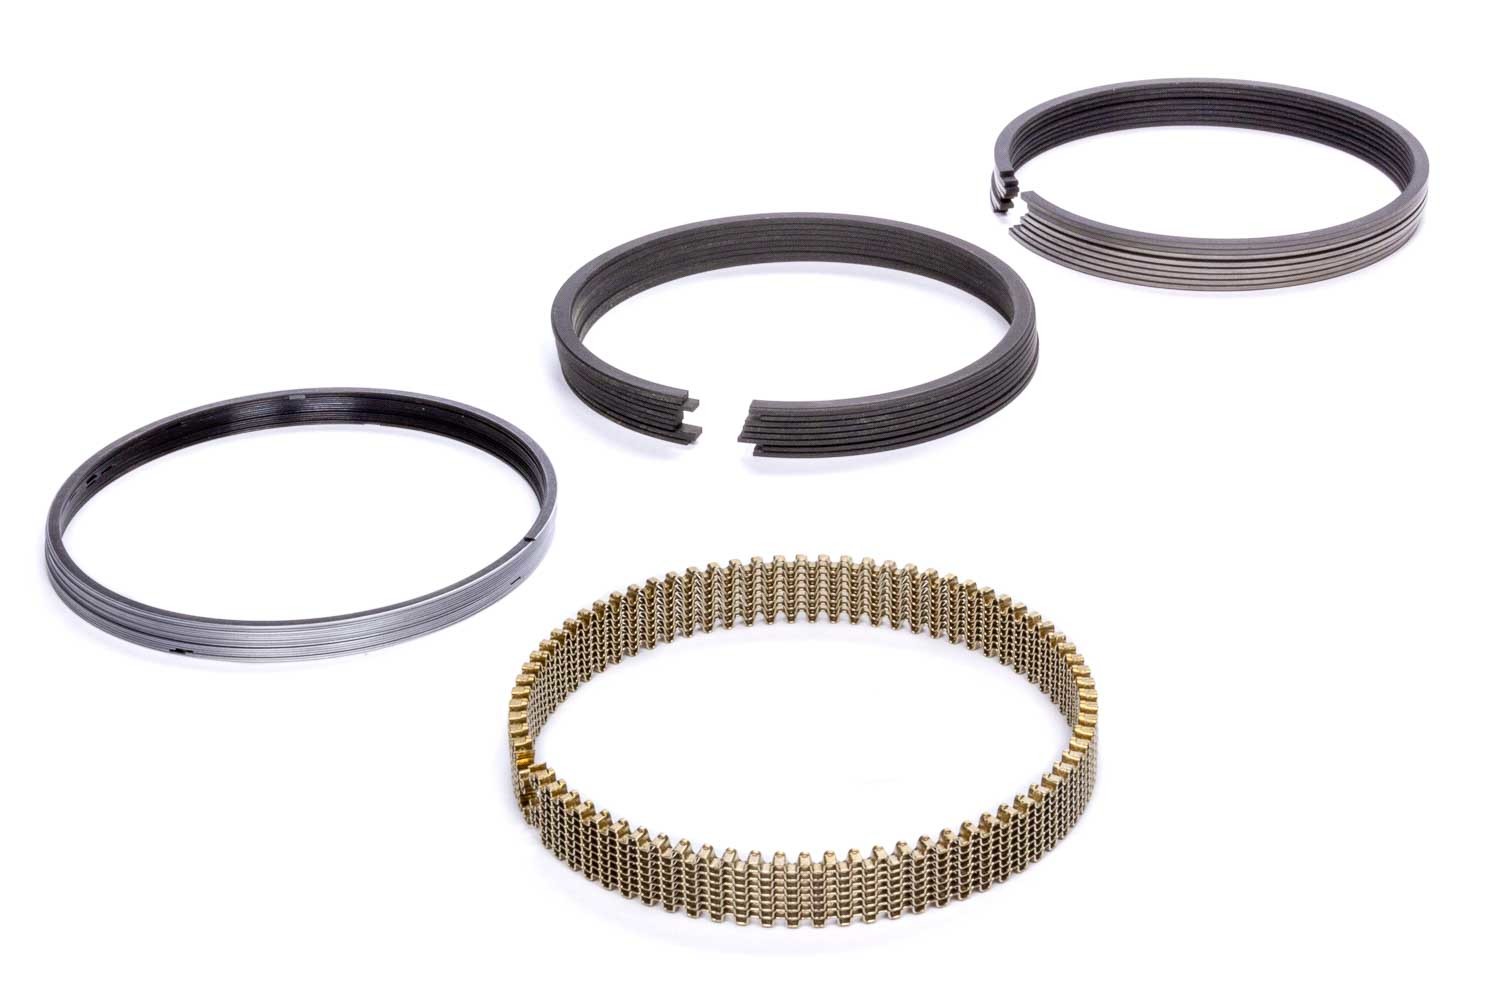 Hastings Piston Rings SM8560020 Piston Rings, Racing Rings, 3.937 in Bore, Drop In, 1.5 x 1.5 x 3.0 mm Thick, Standard Tension, Steel, Plasma Moly, 8-Cylinder, Kit